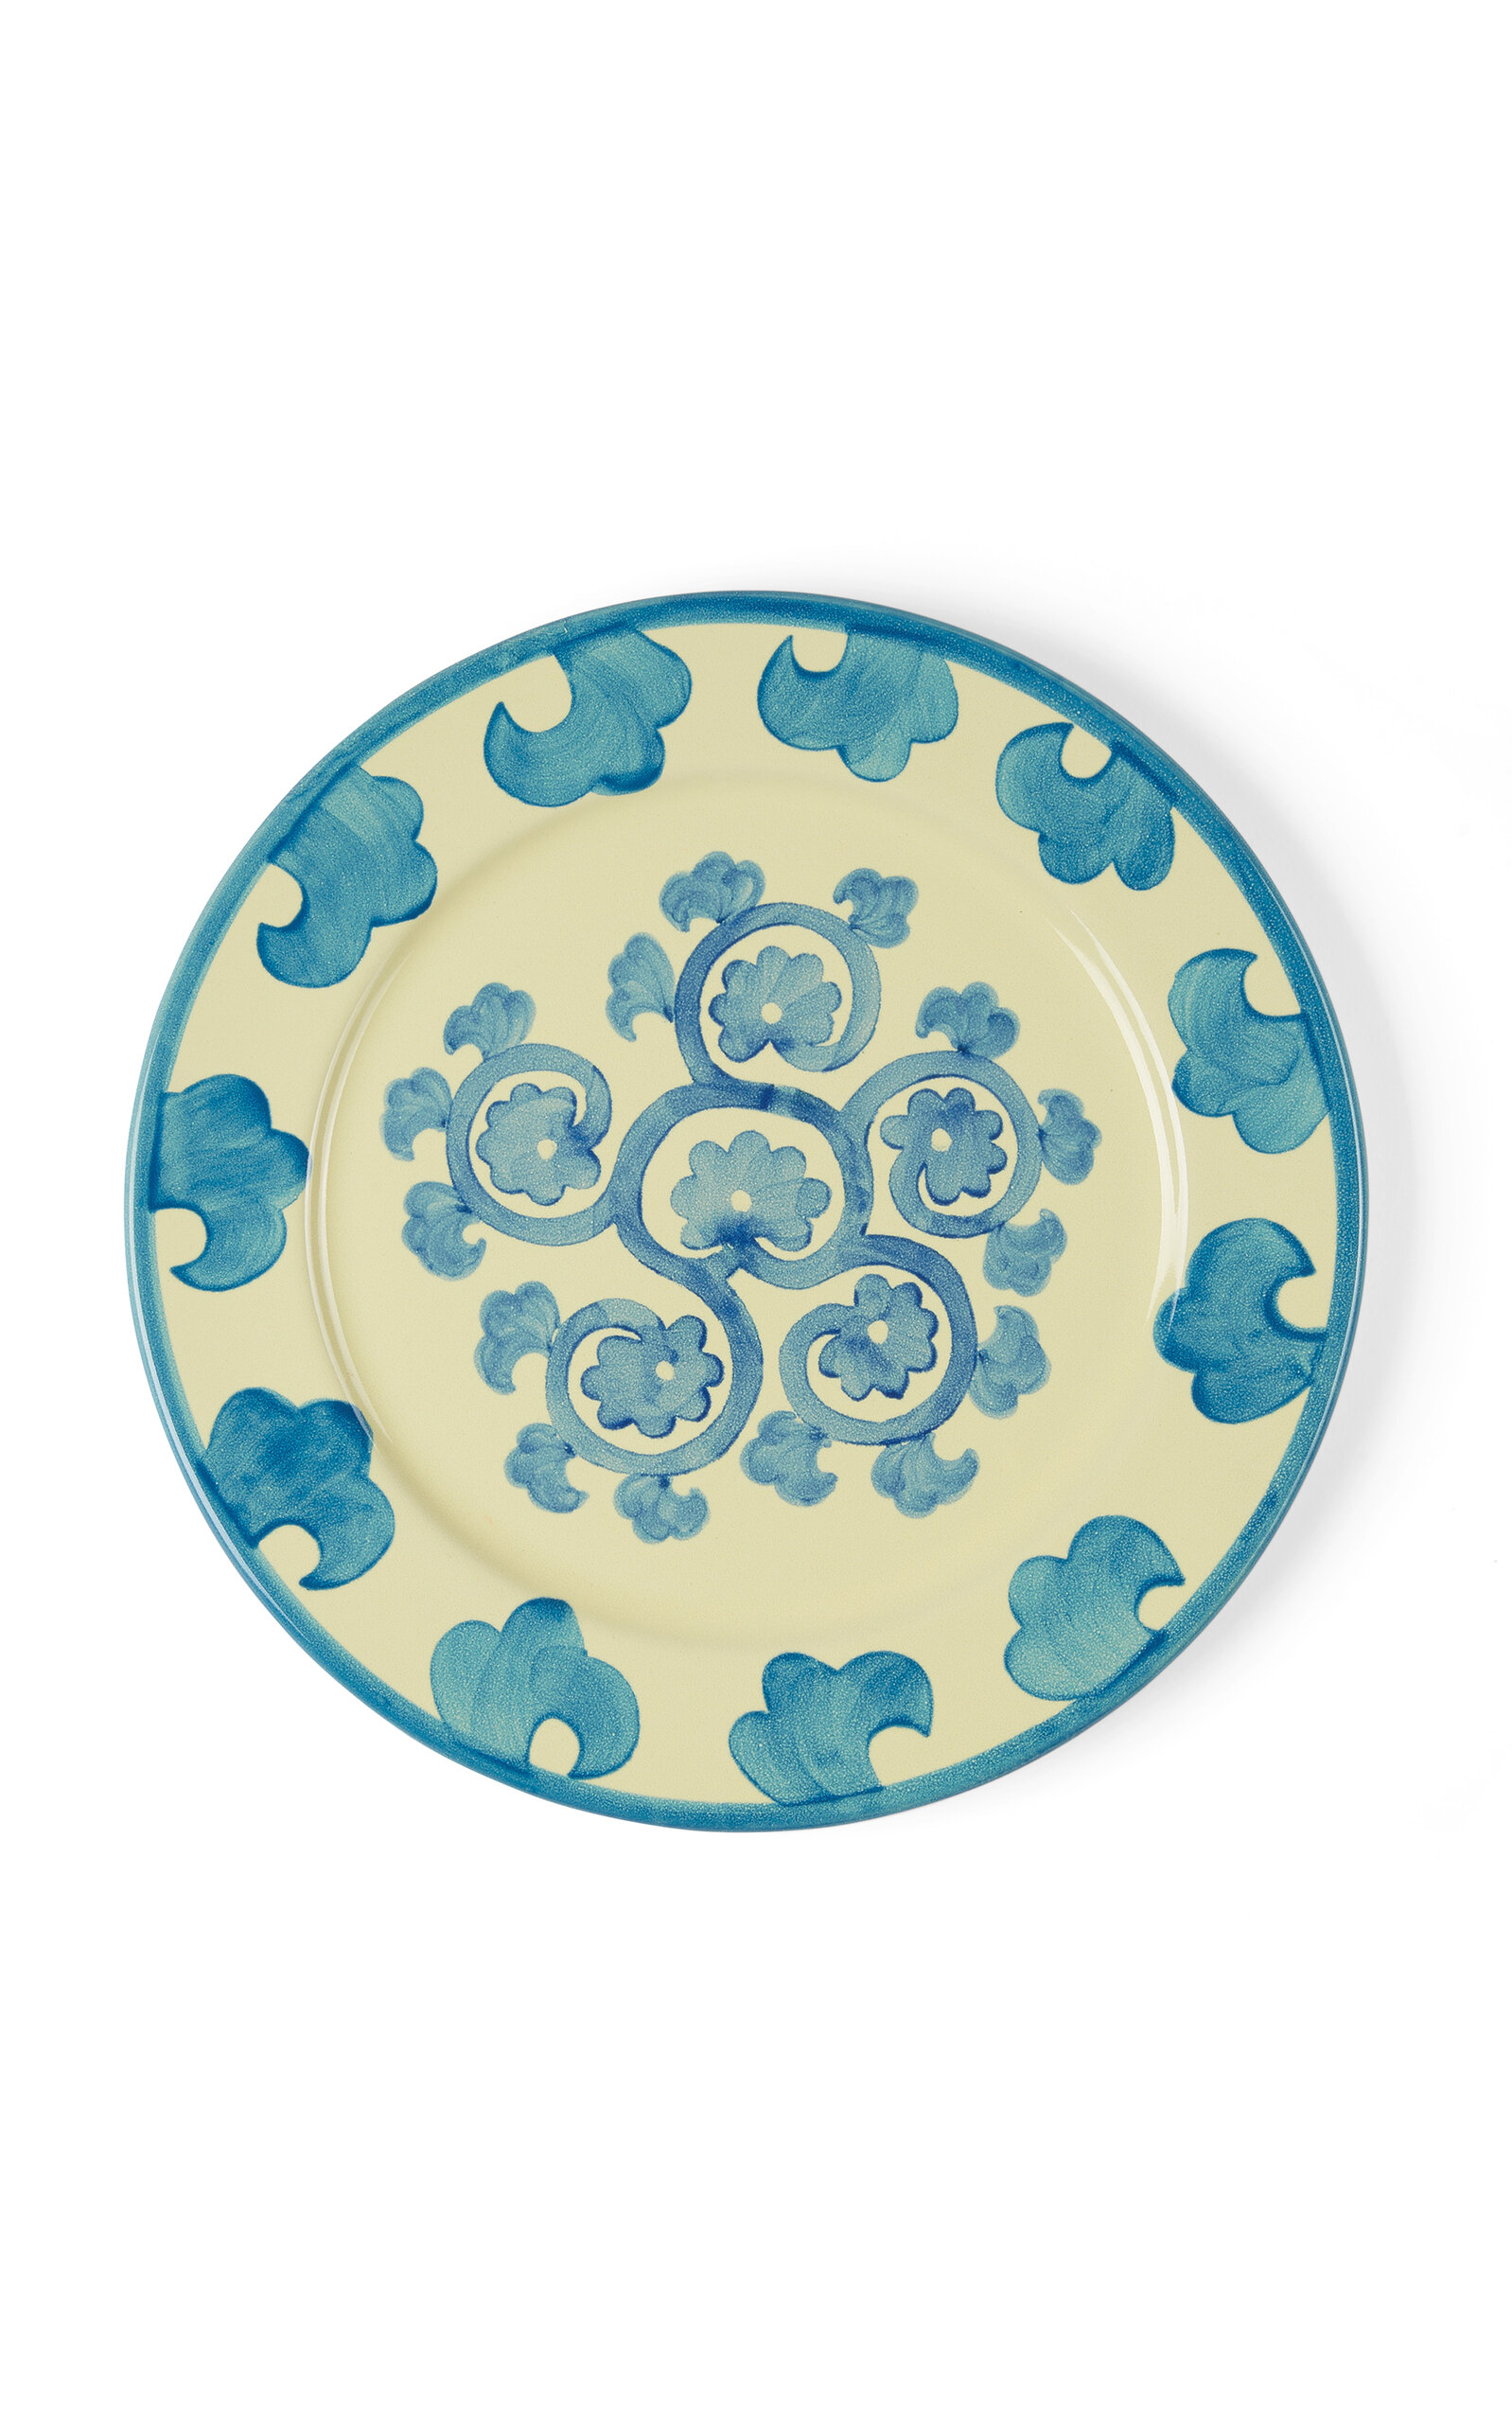 Emporio Sirenuse Flower Charger Plate In Multi